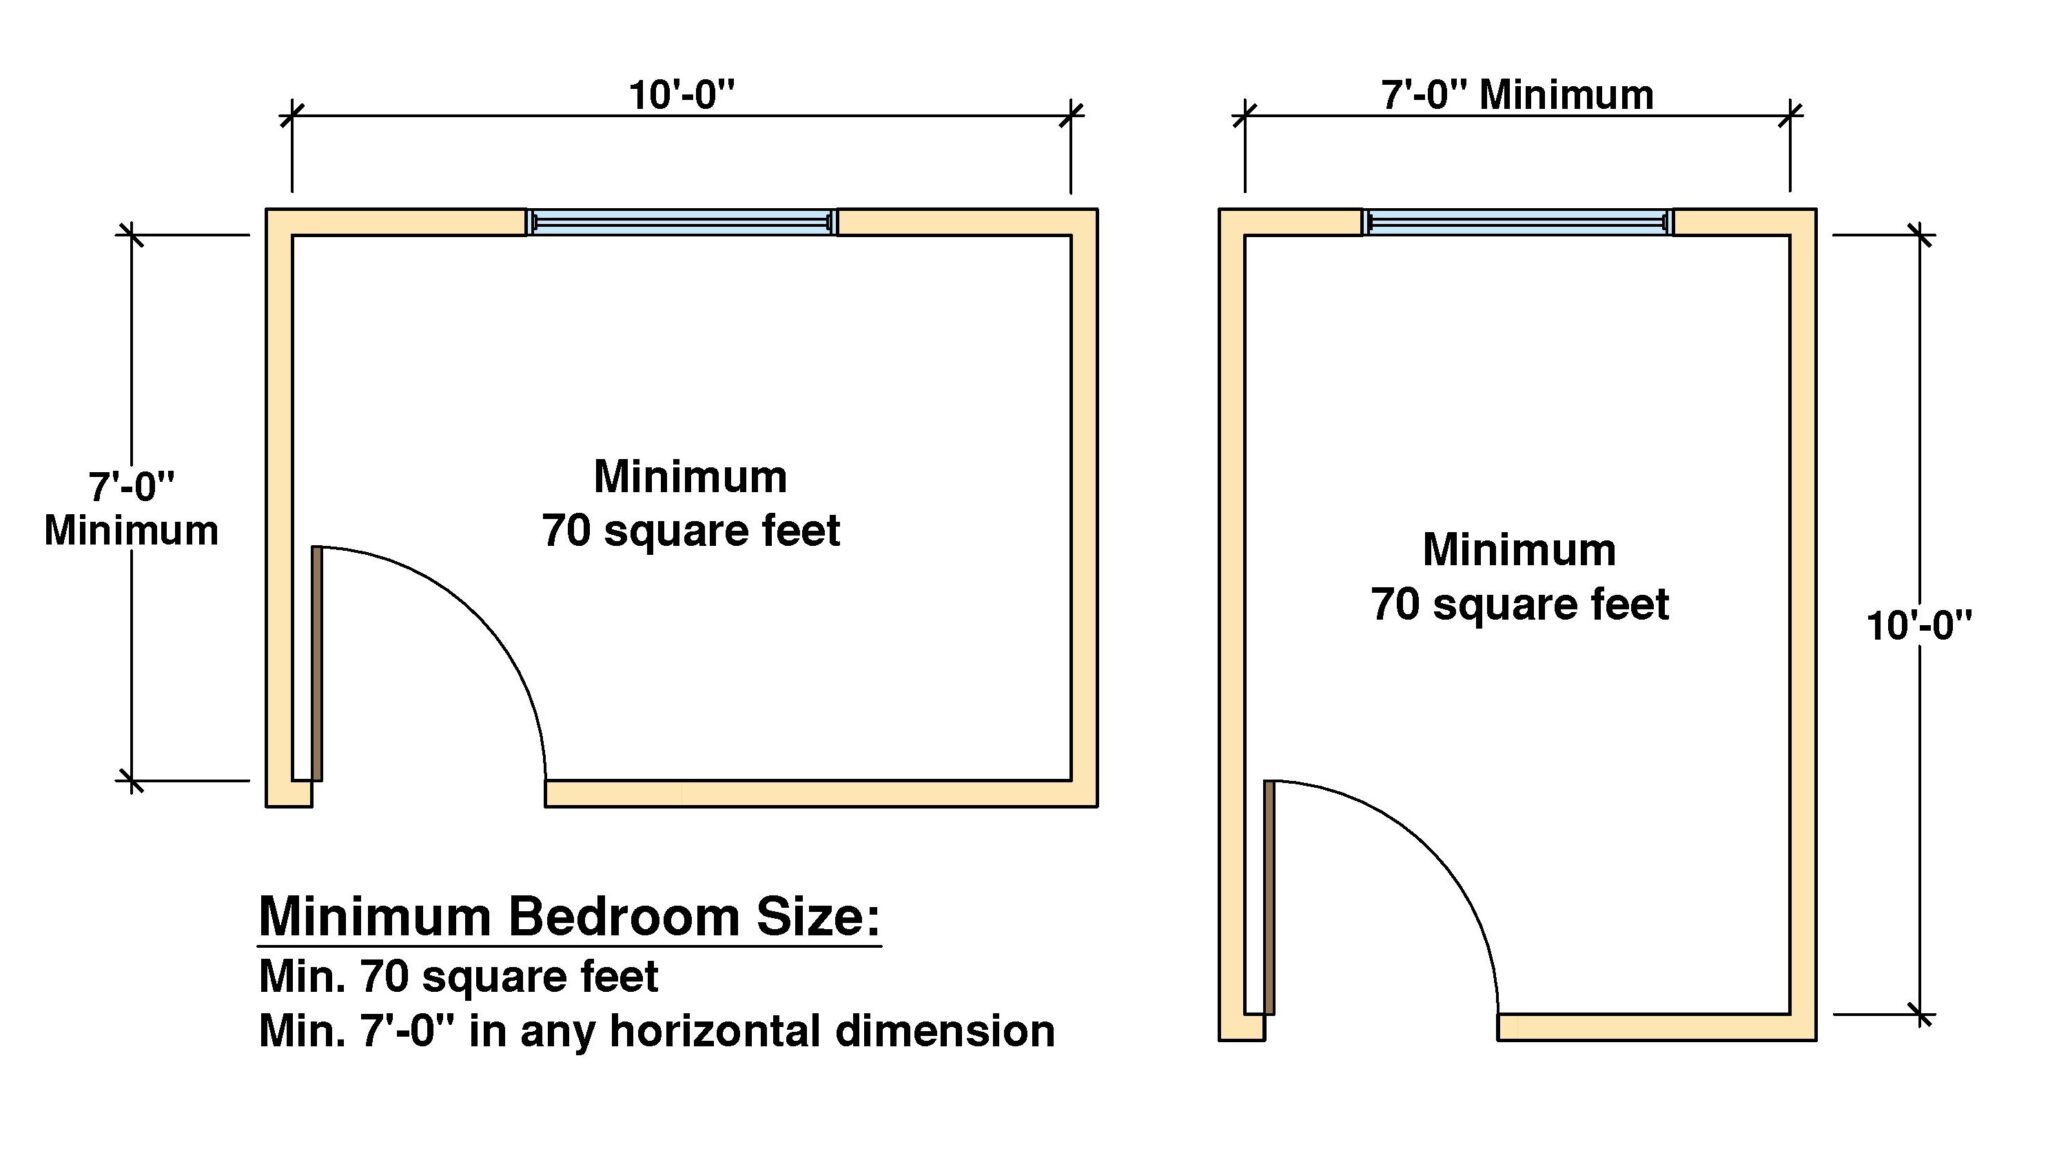 Typical Bedroom Size